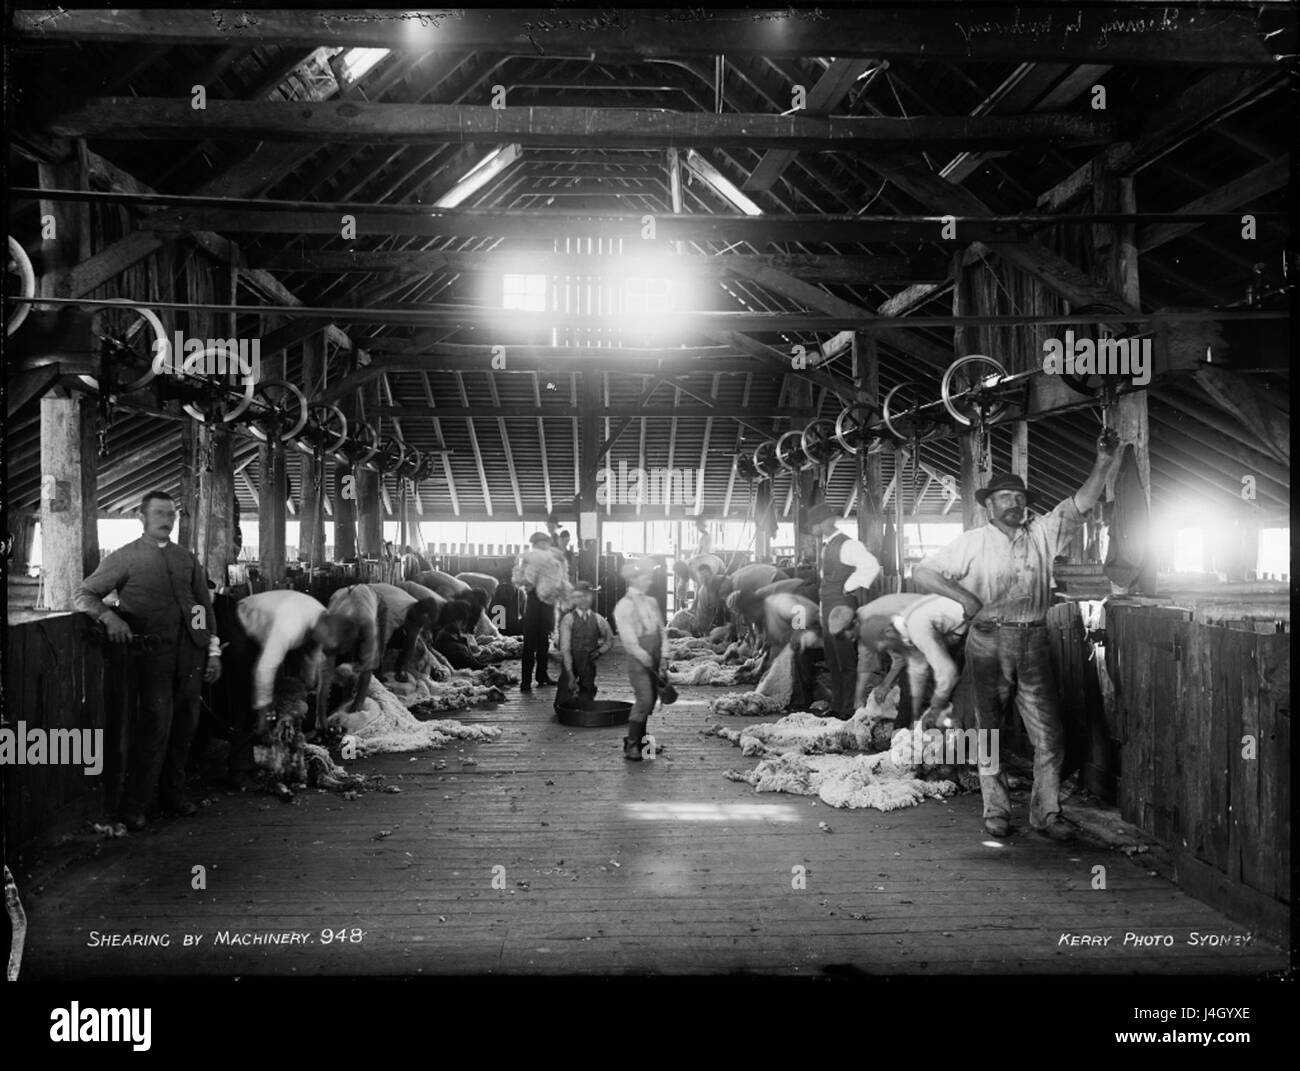 Shearing by machinery from The Powerhouse Museum Collection Stock Photo